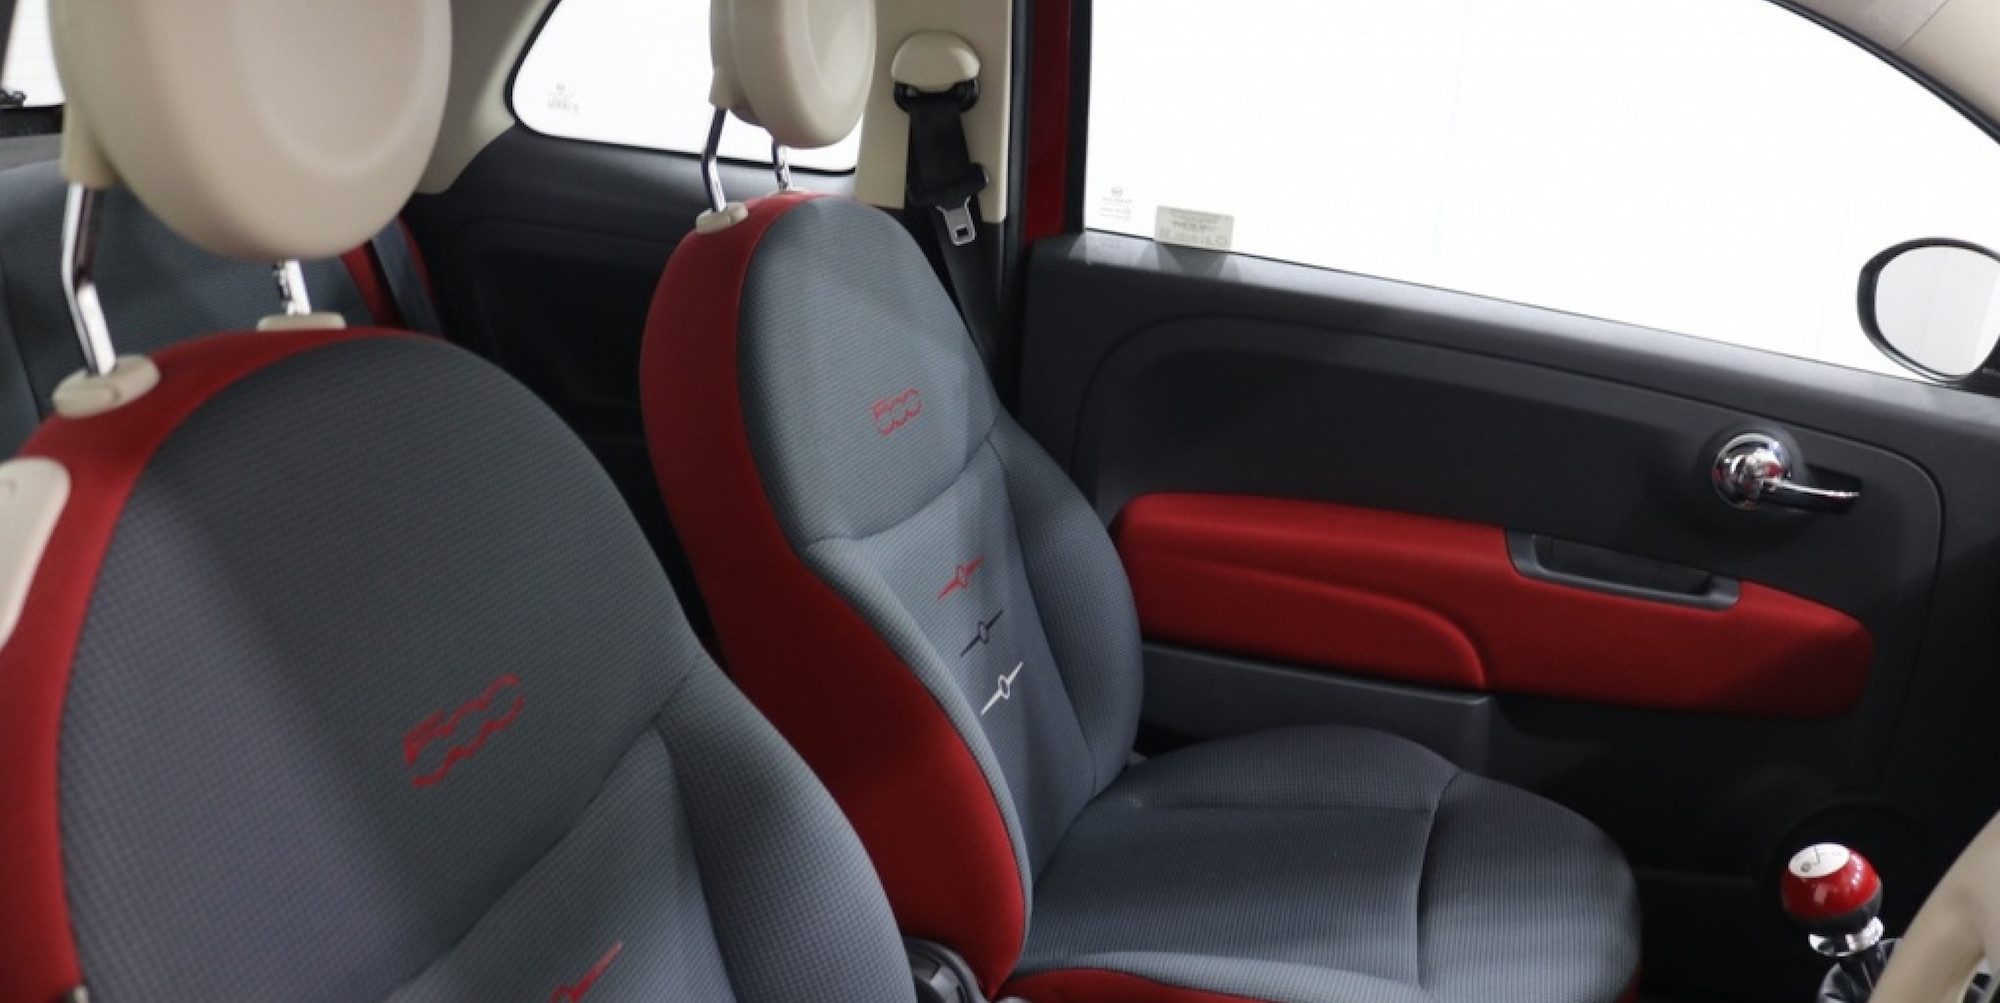 Fiat 500 front interior with red trim 